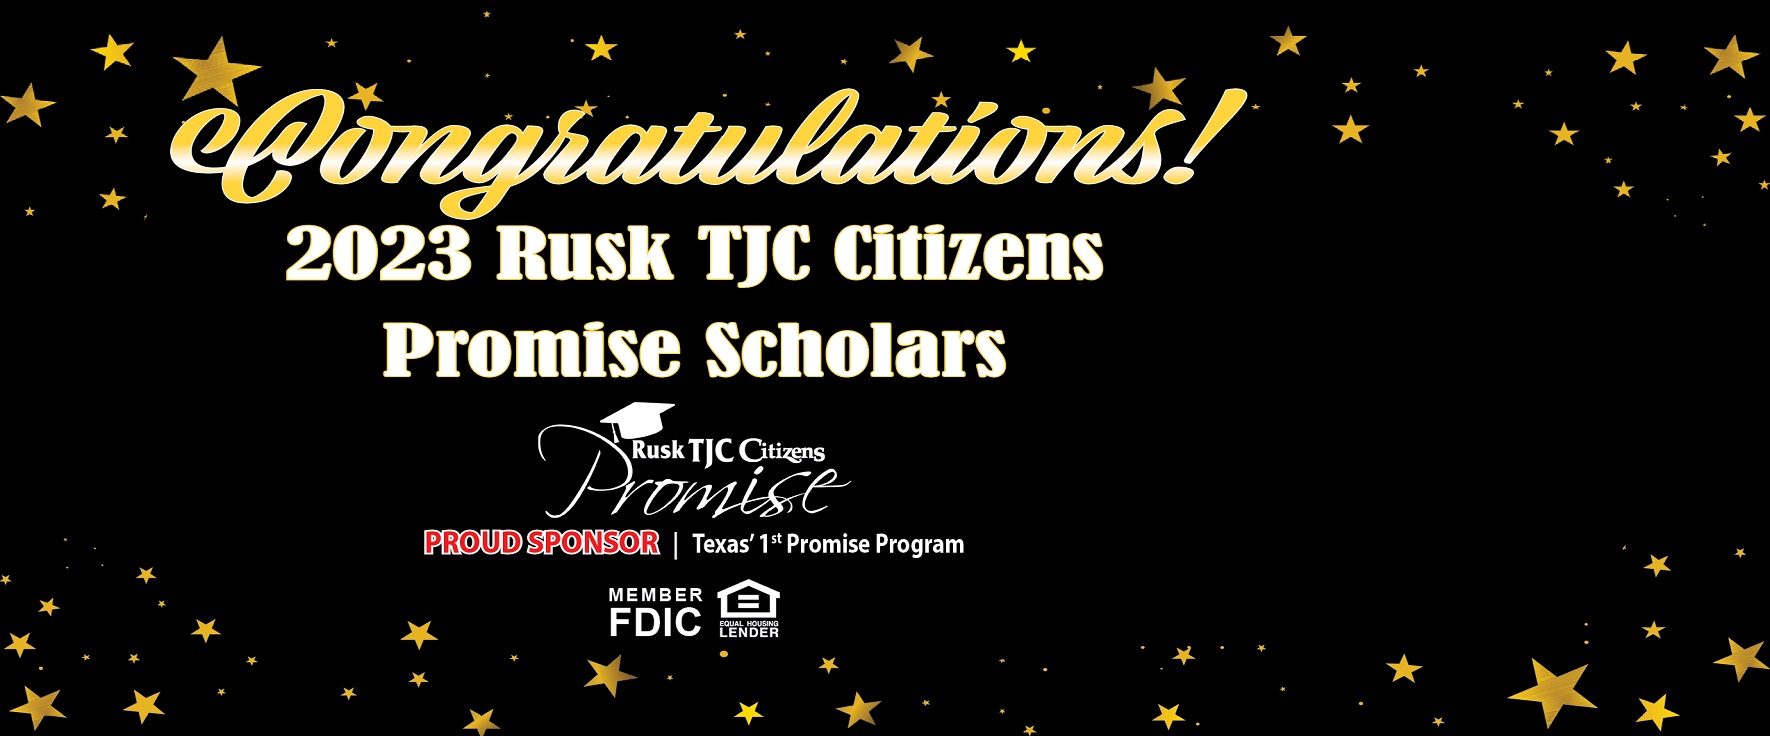 Congratulations to the 2023 TJC Promise Scholars